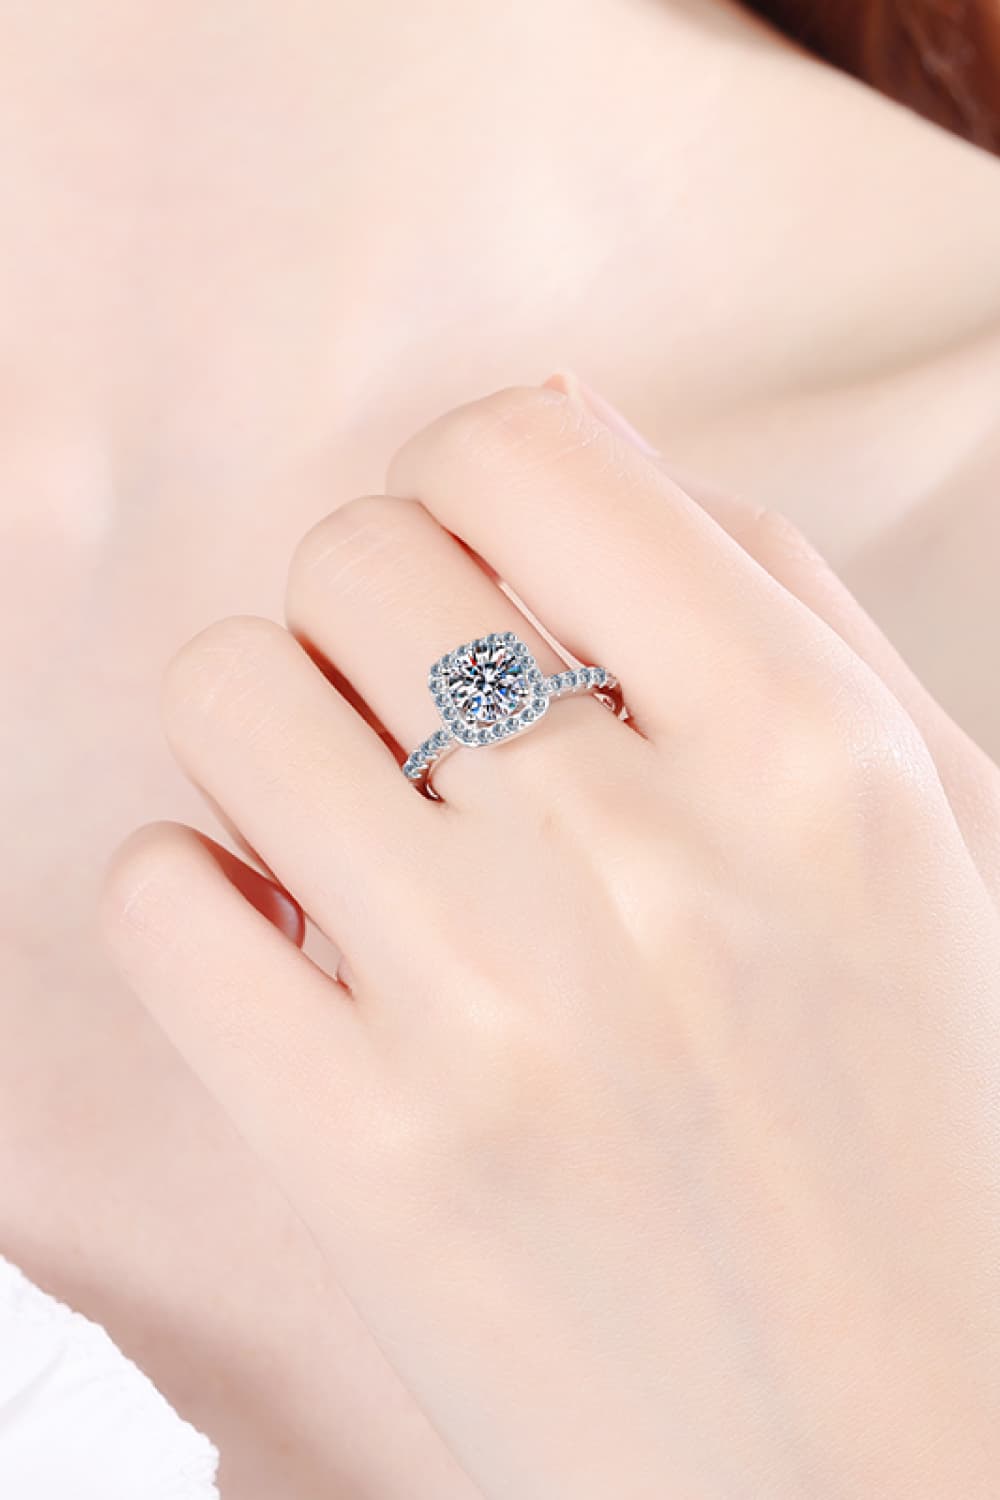 2 Carat Moissanite Square Halo Ring - Rings - FITGGINS